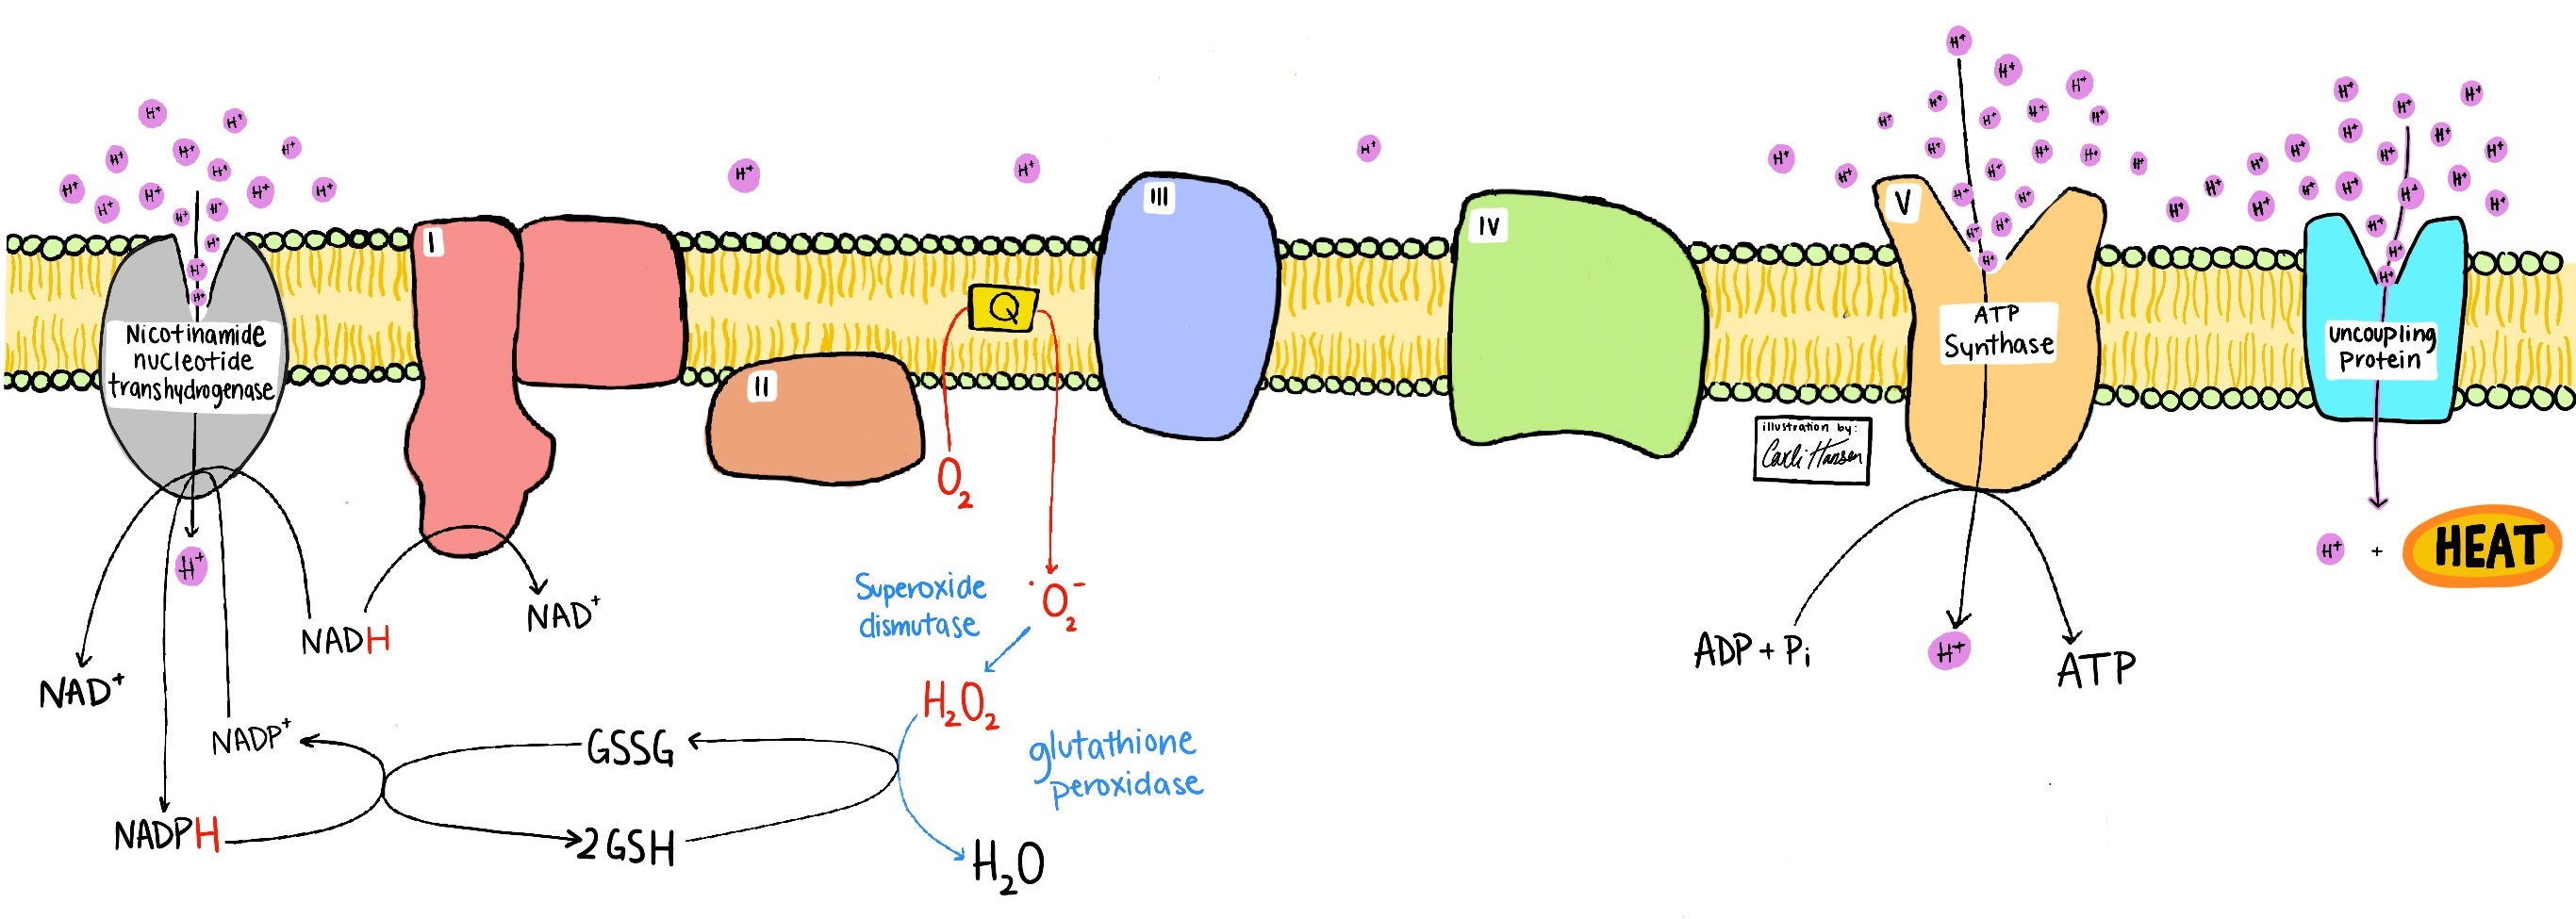 Illustration of electron flow through the respiratory electron transport chain, with various labeled components and reactions